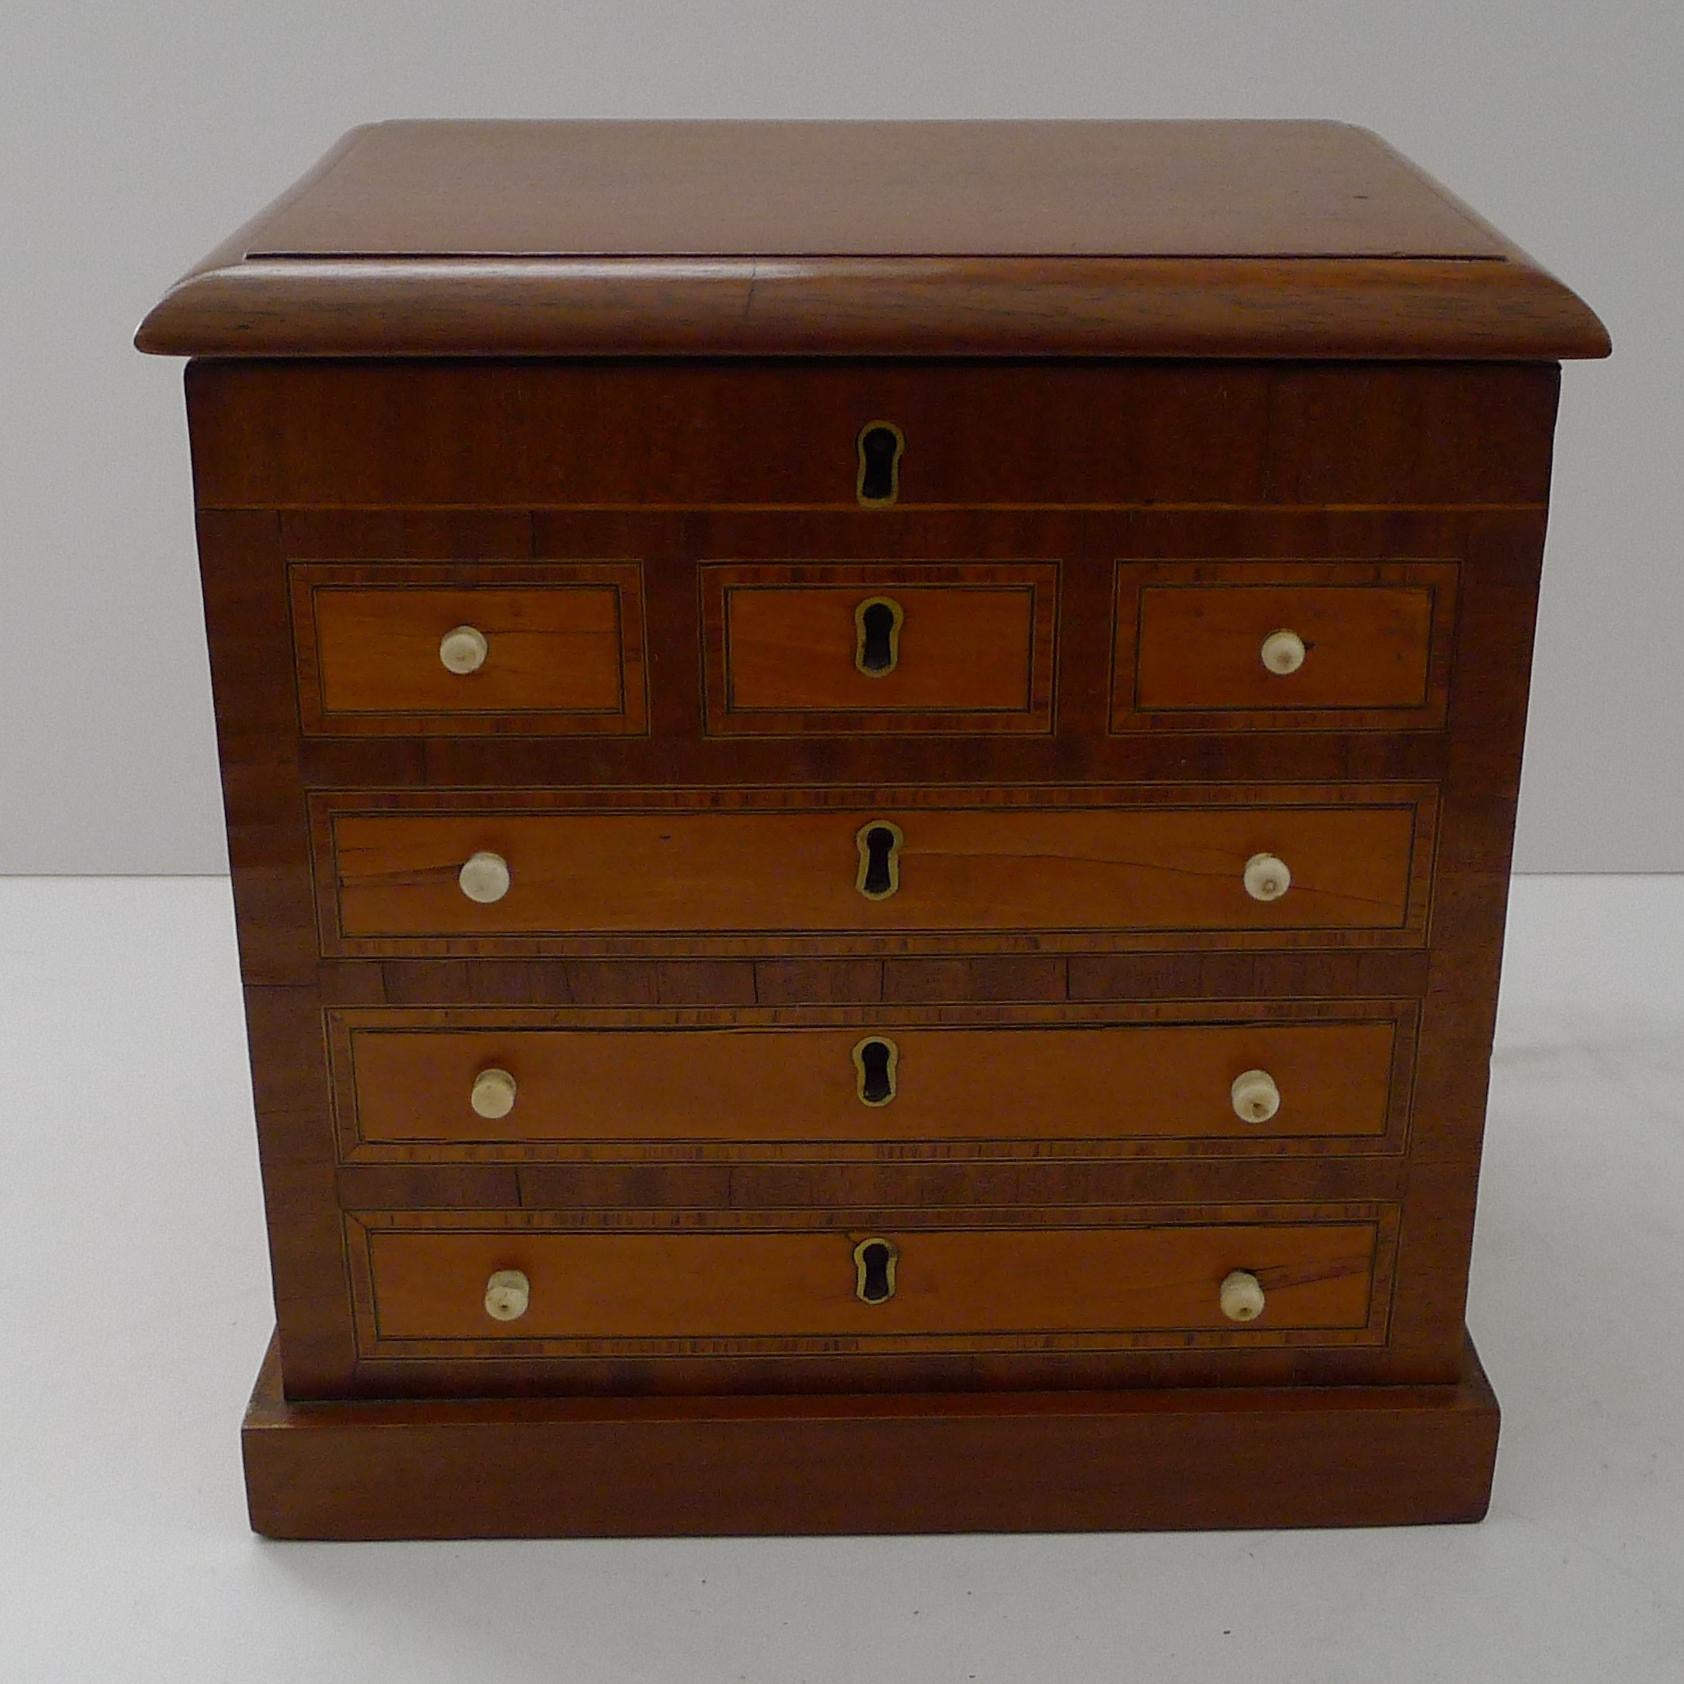 Rare English Mahogany Tea Caddy - Form of Chest of Drawers c.1880 For Sale 2